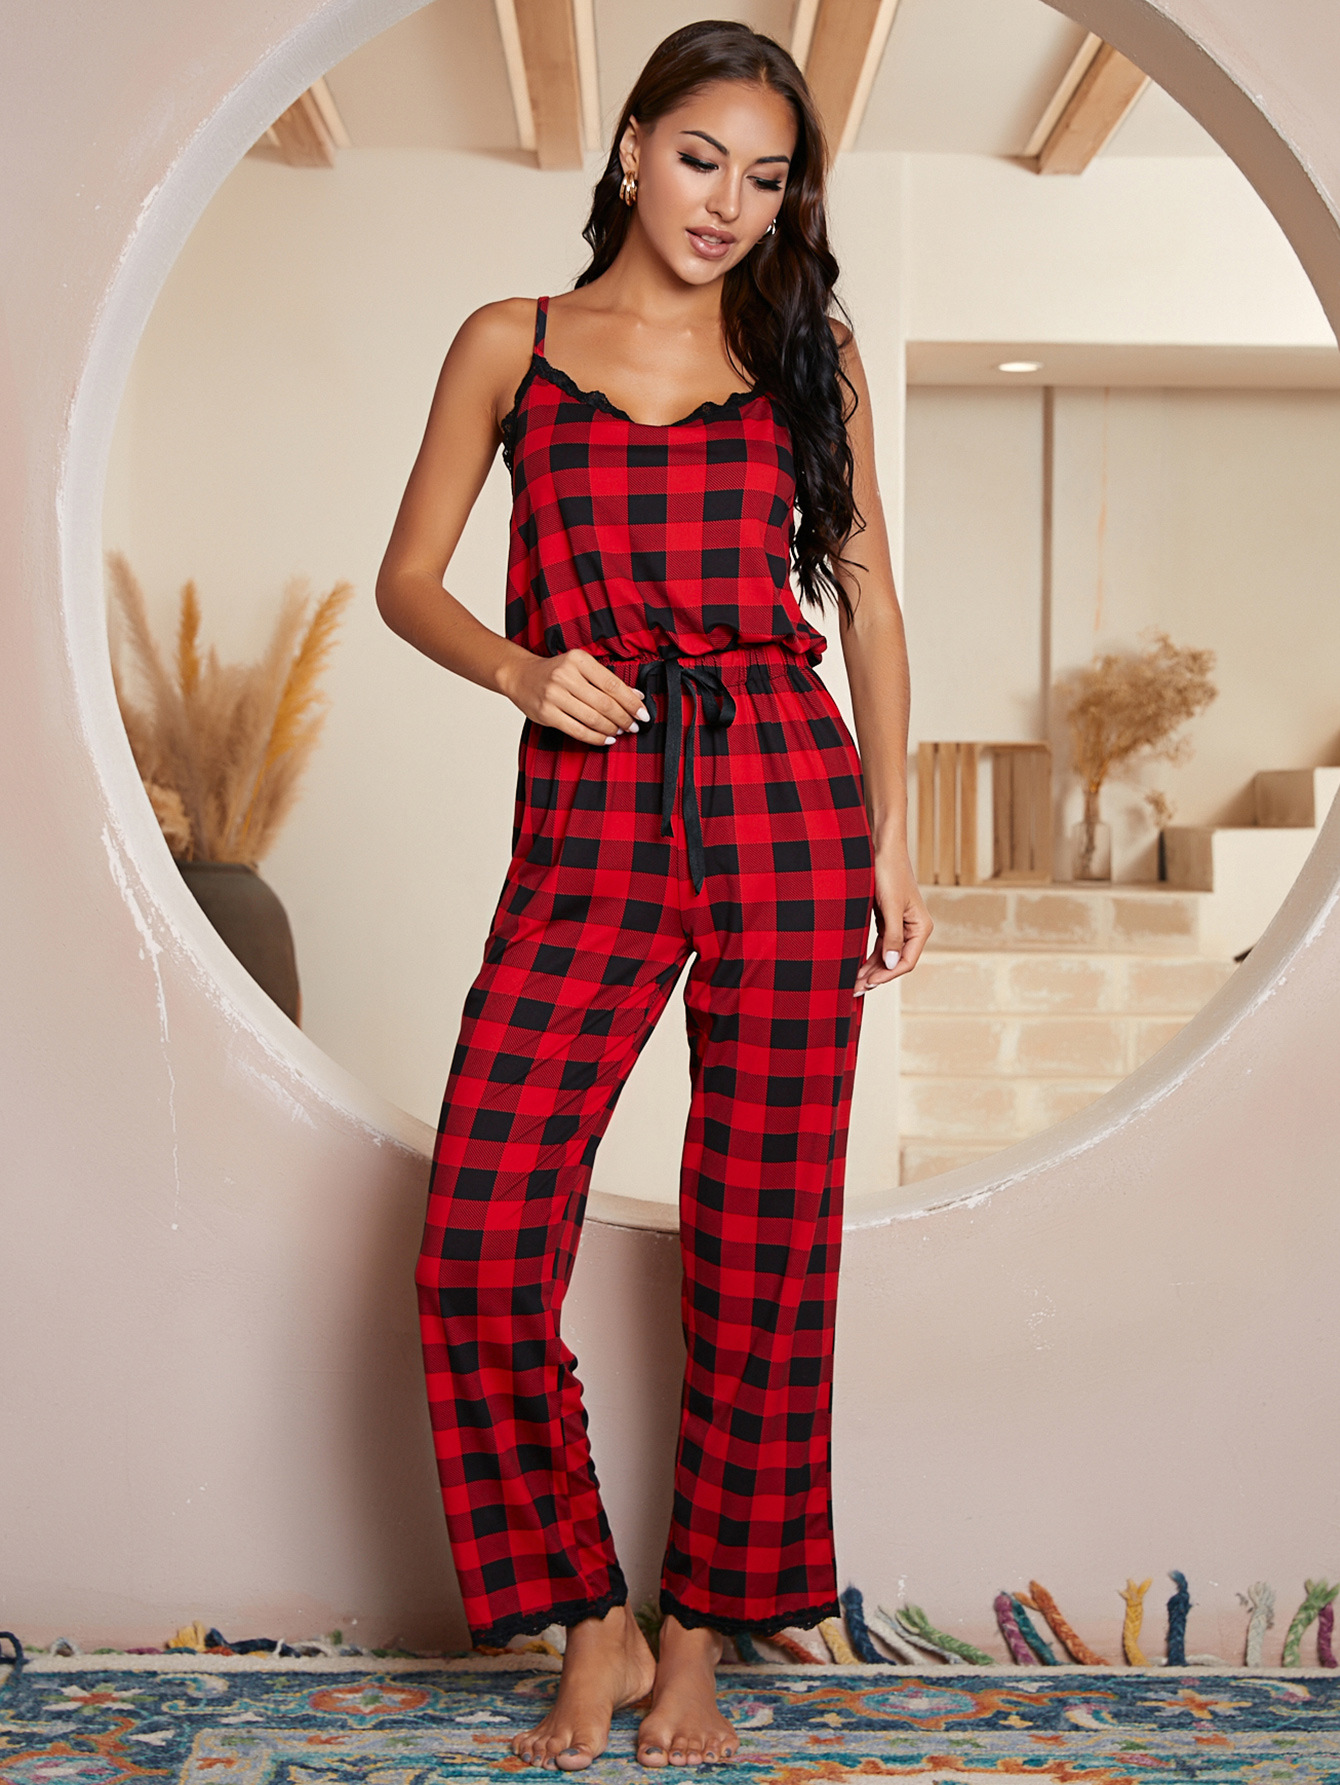 sling low-cut backless slim plaid lace one-piece Pajamas Loungewear-Can be worn outside NSWFC130741